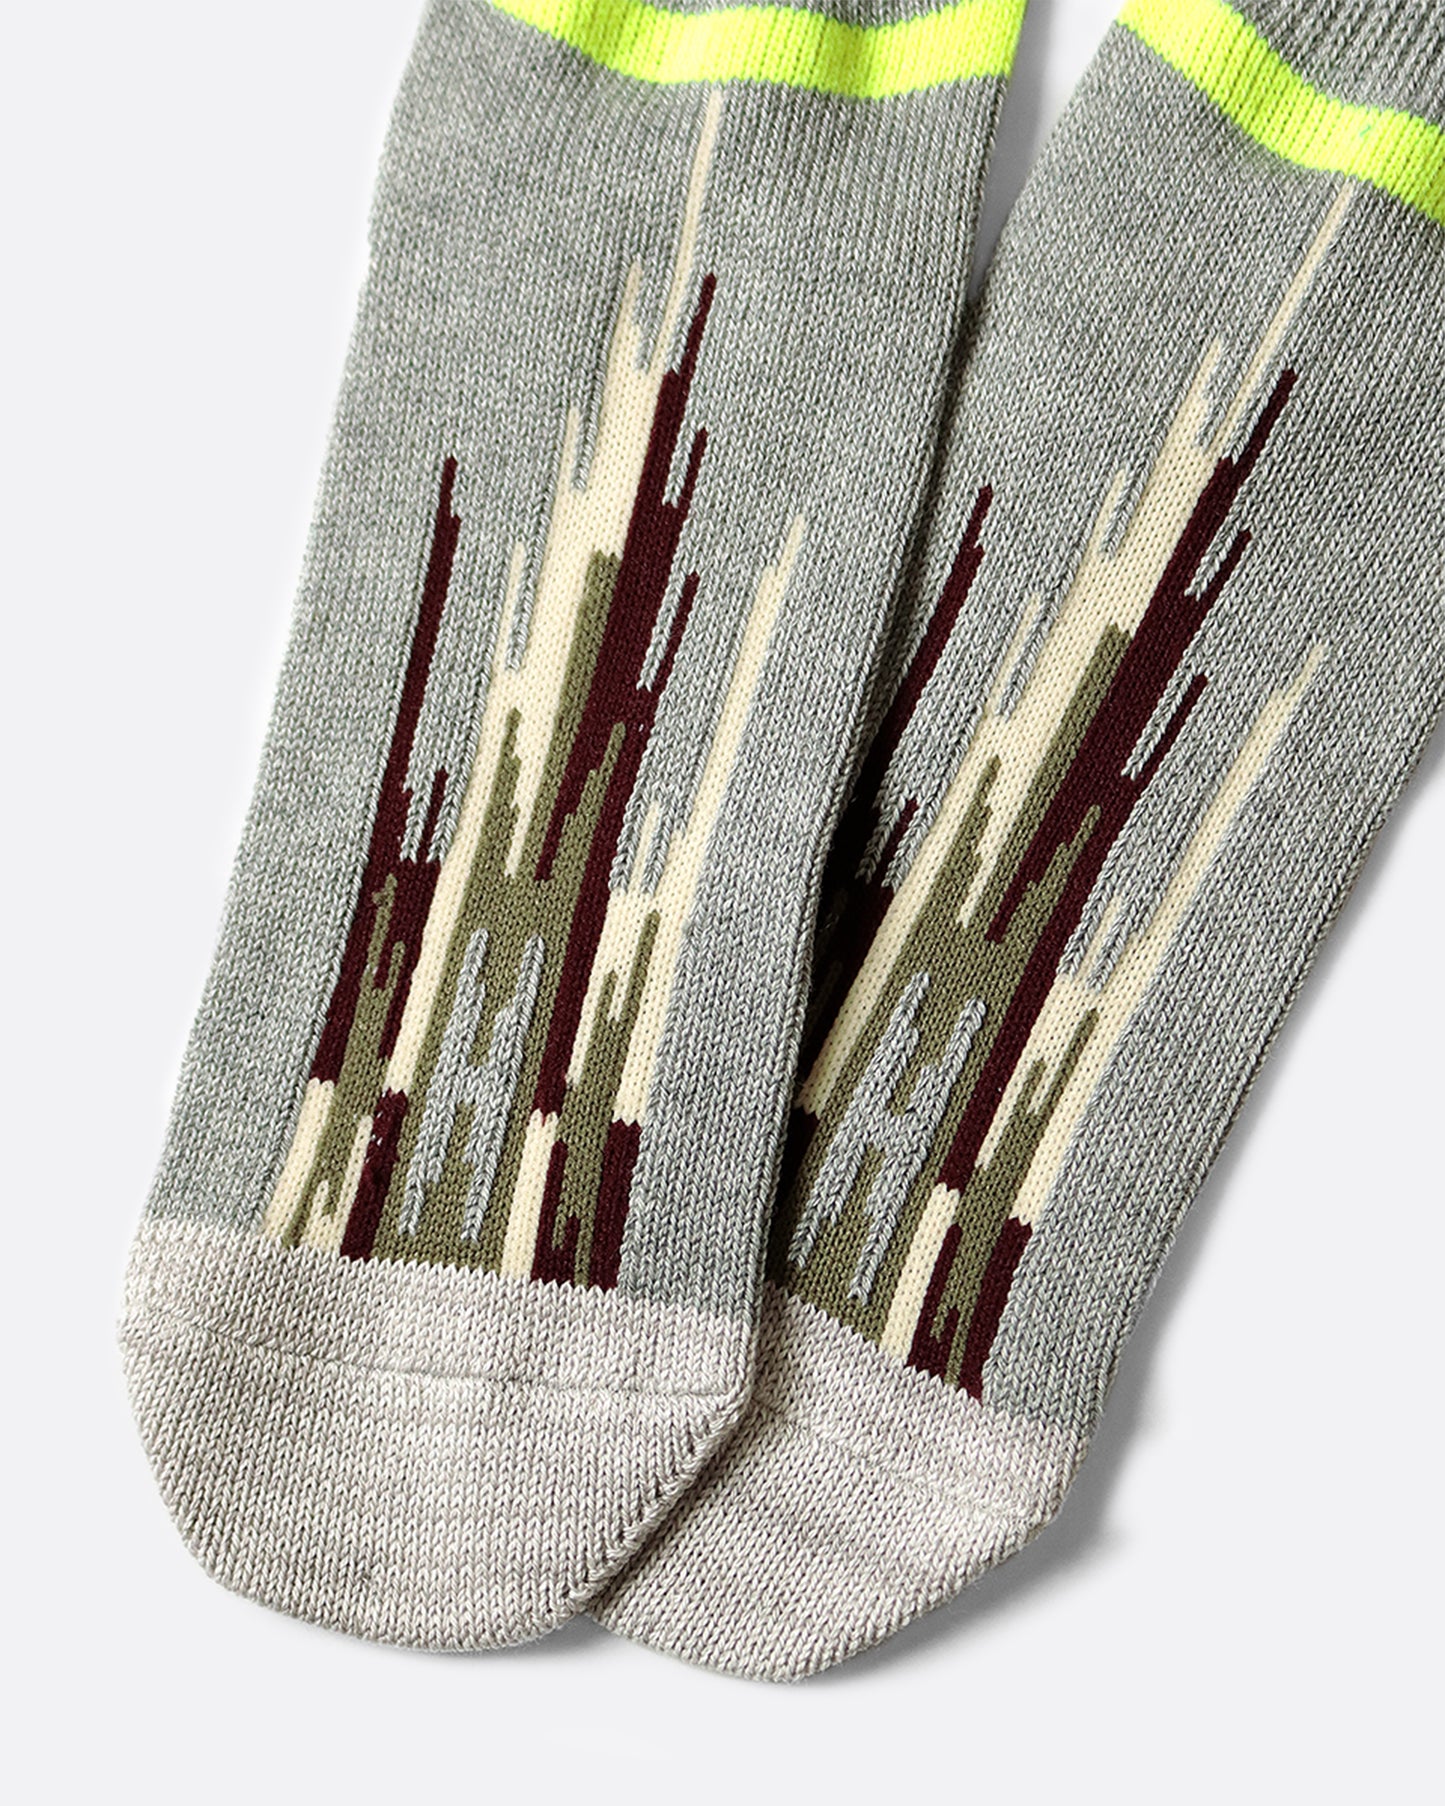 A pair of light gray socks that hit mid-ankle with an Ortega pattern across the top of the foot in shades of brown, and a neon green band at the top.